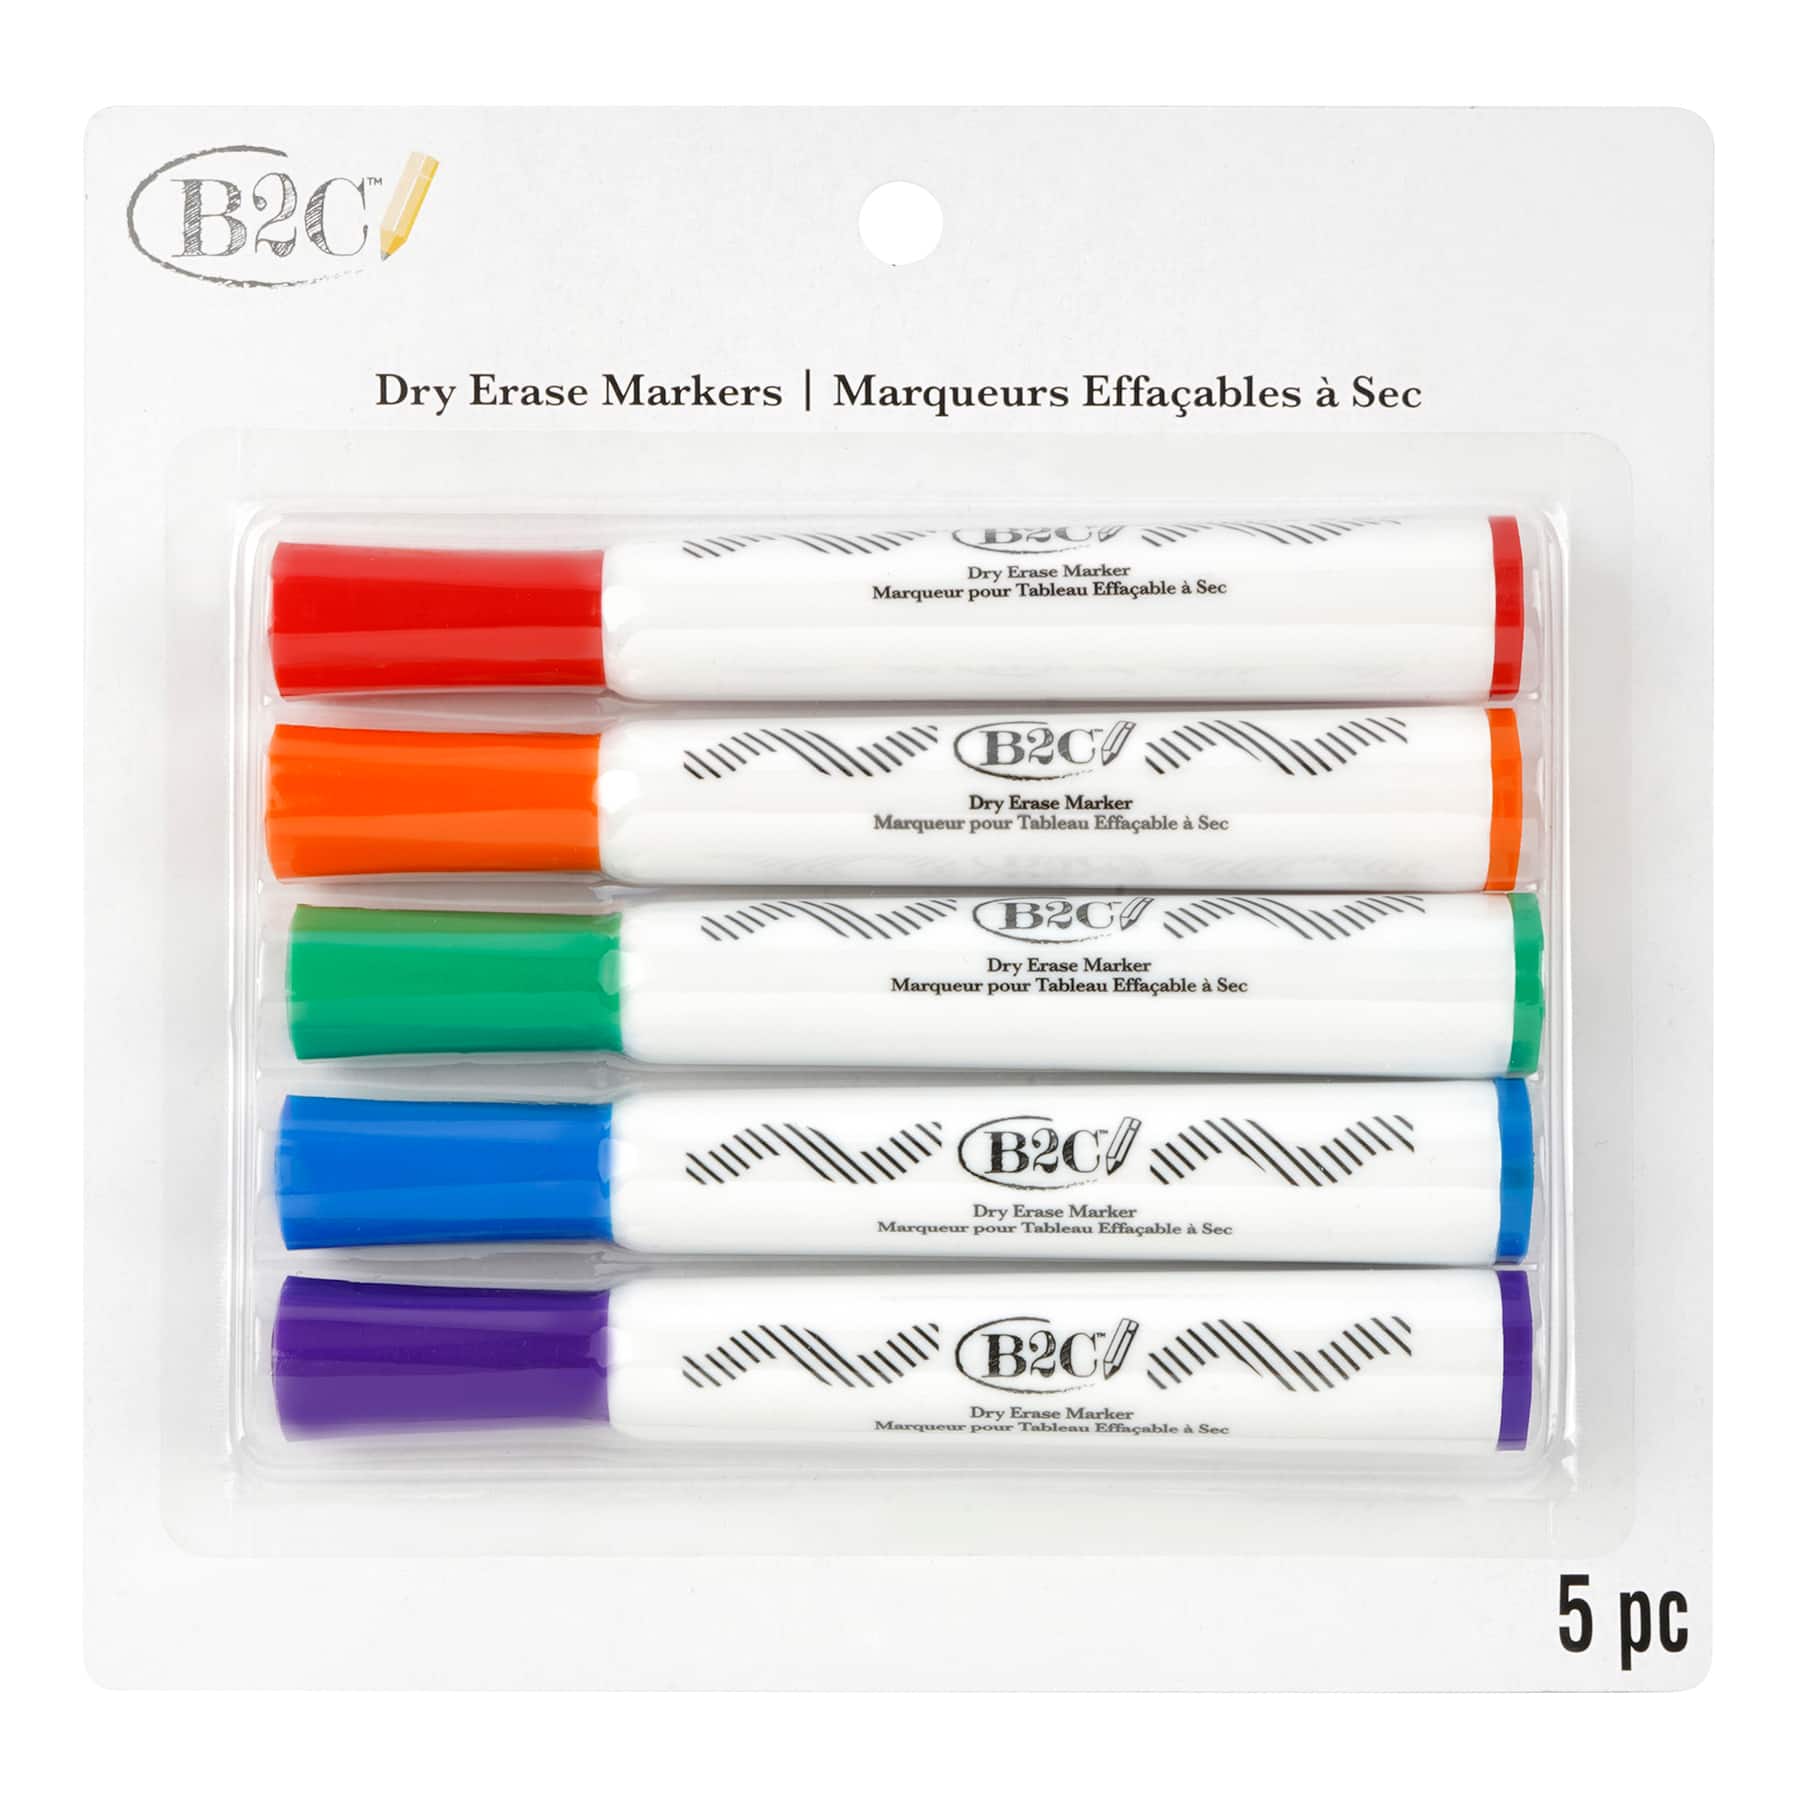 WallDeca Dry-Erase Thick Fine Line Markers, 25 Assorted Colors, Non-Toxic  Art Tools for Kids, 25 Pack - Fry's Food Stores